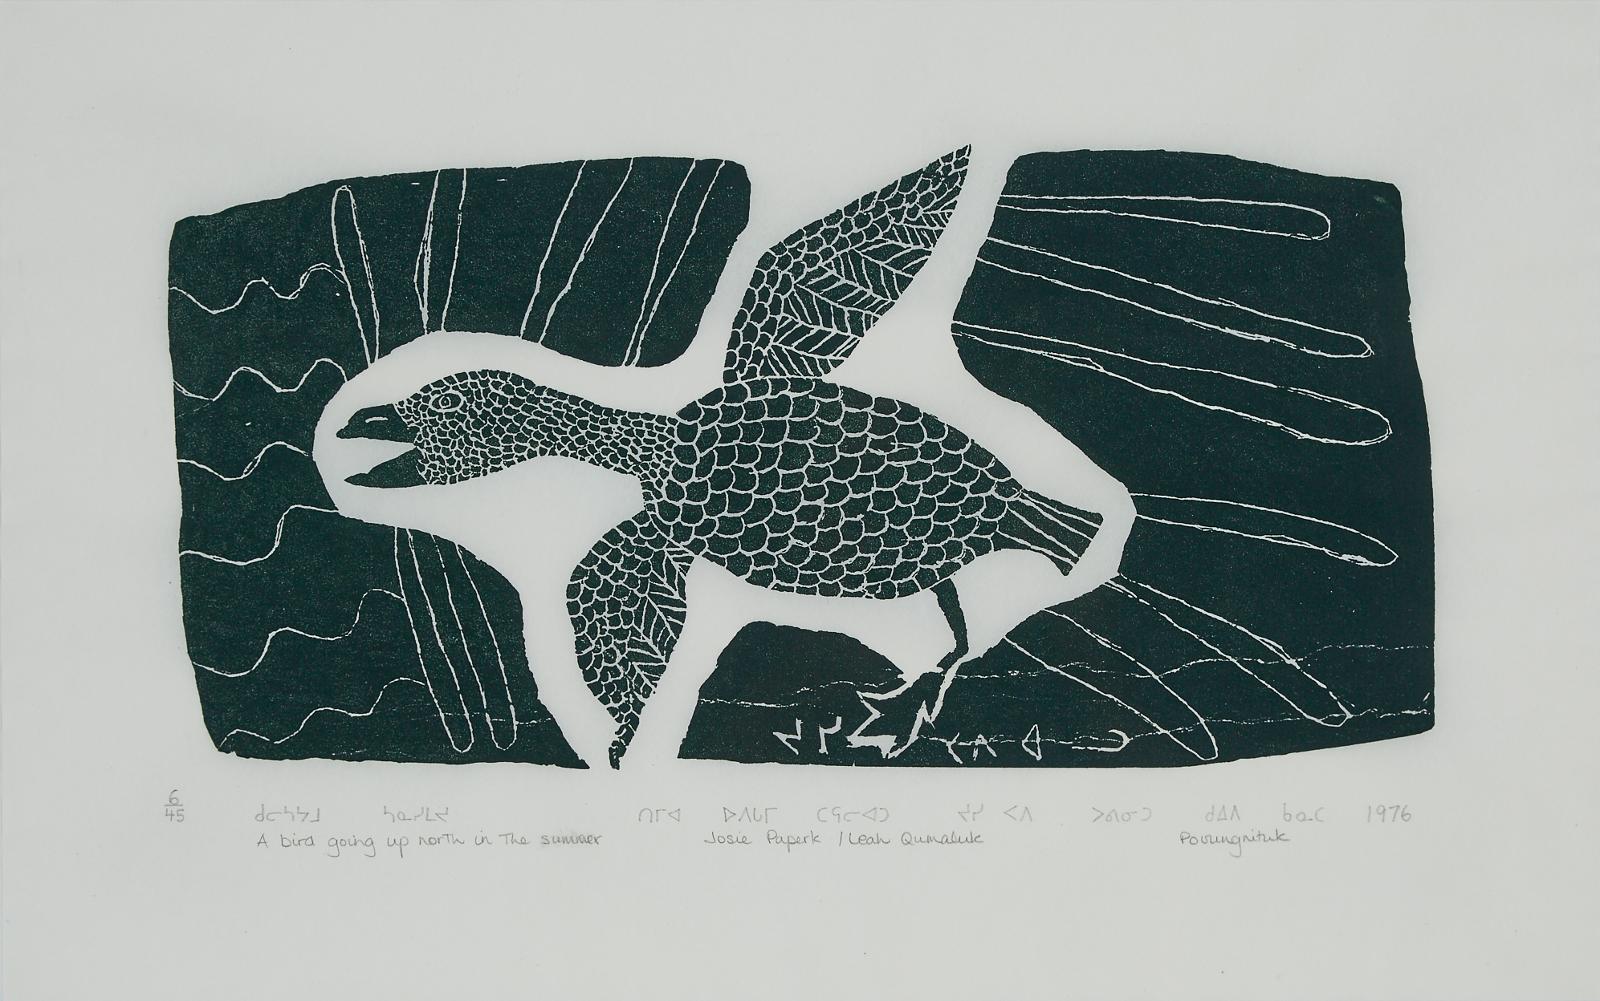 Josie Pamiutu Papialuk (1918-1996) - A Bird Going Up North In The Summer